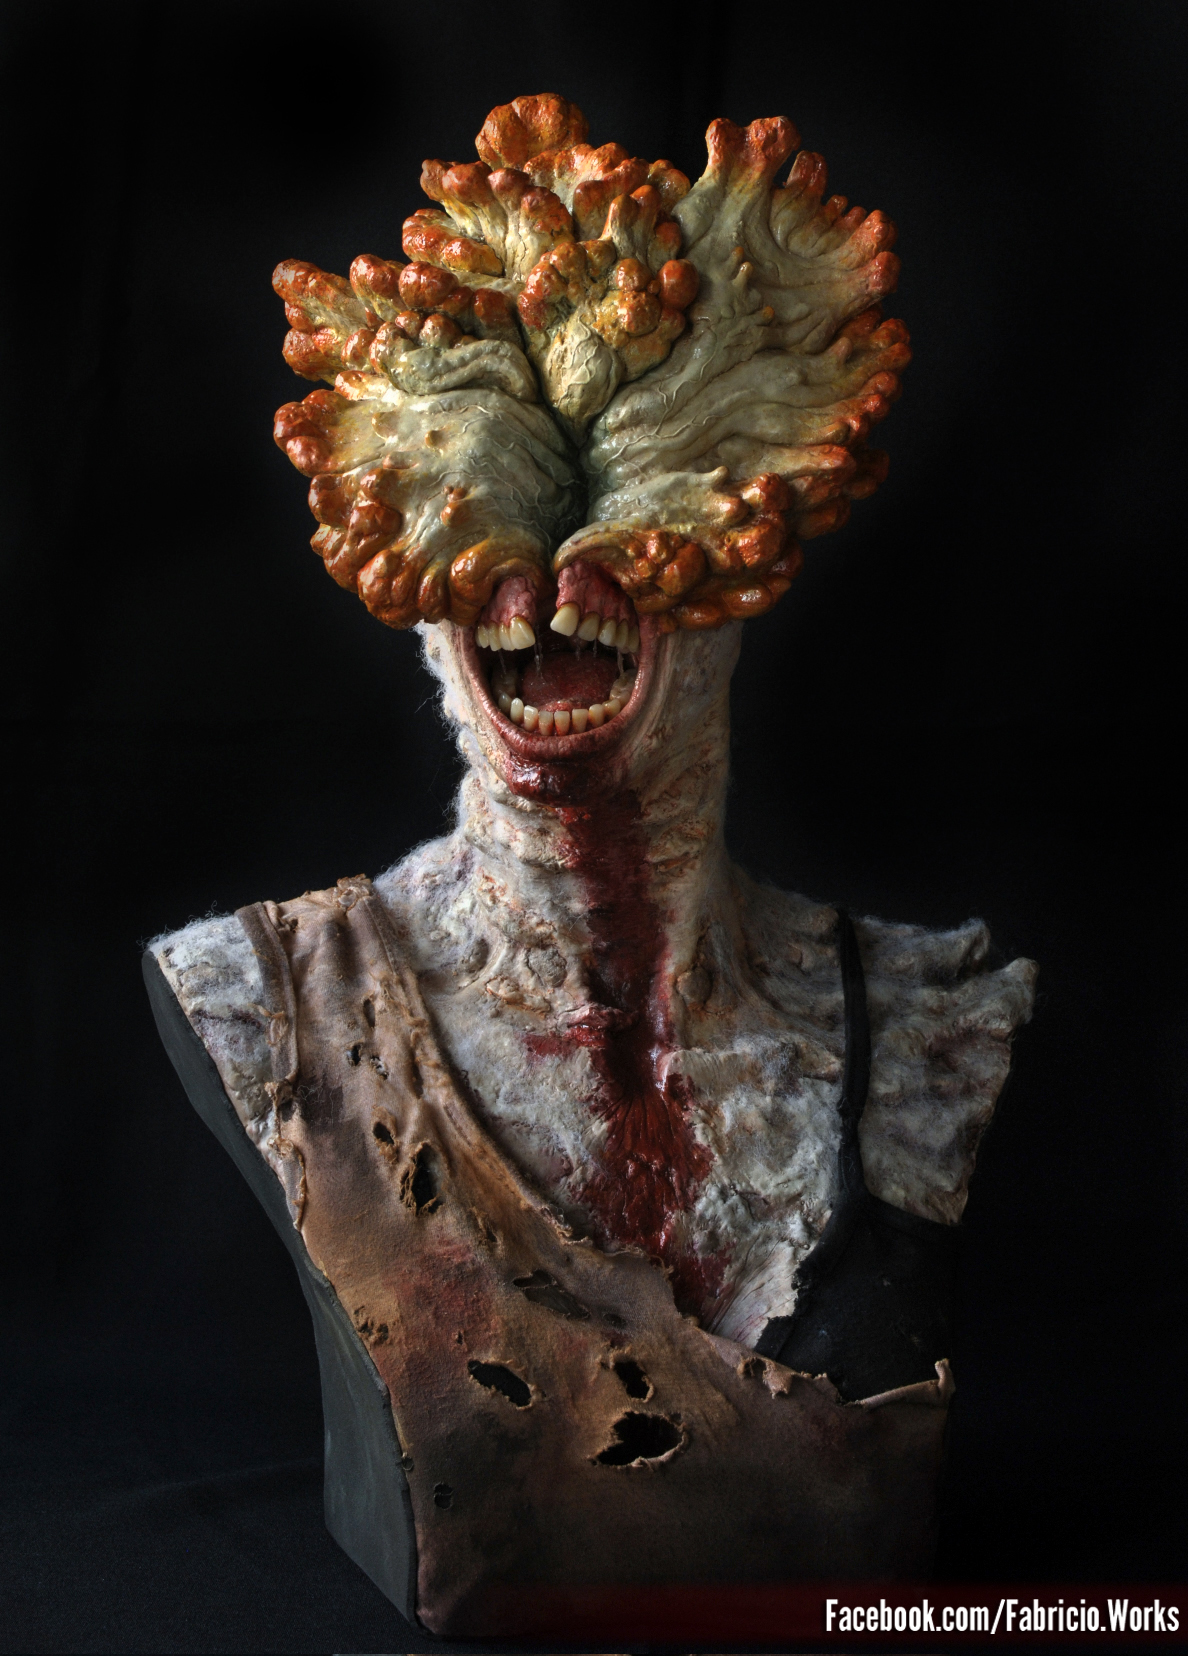 Clicker  1.1 scale bust from The Last of Us